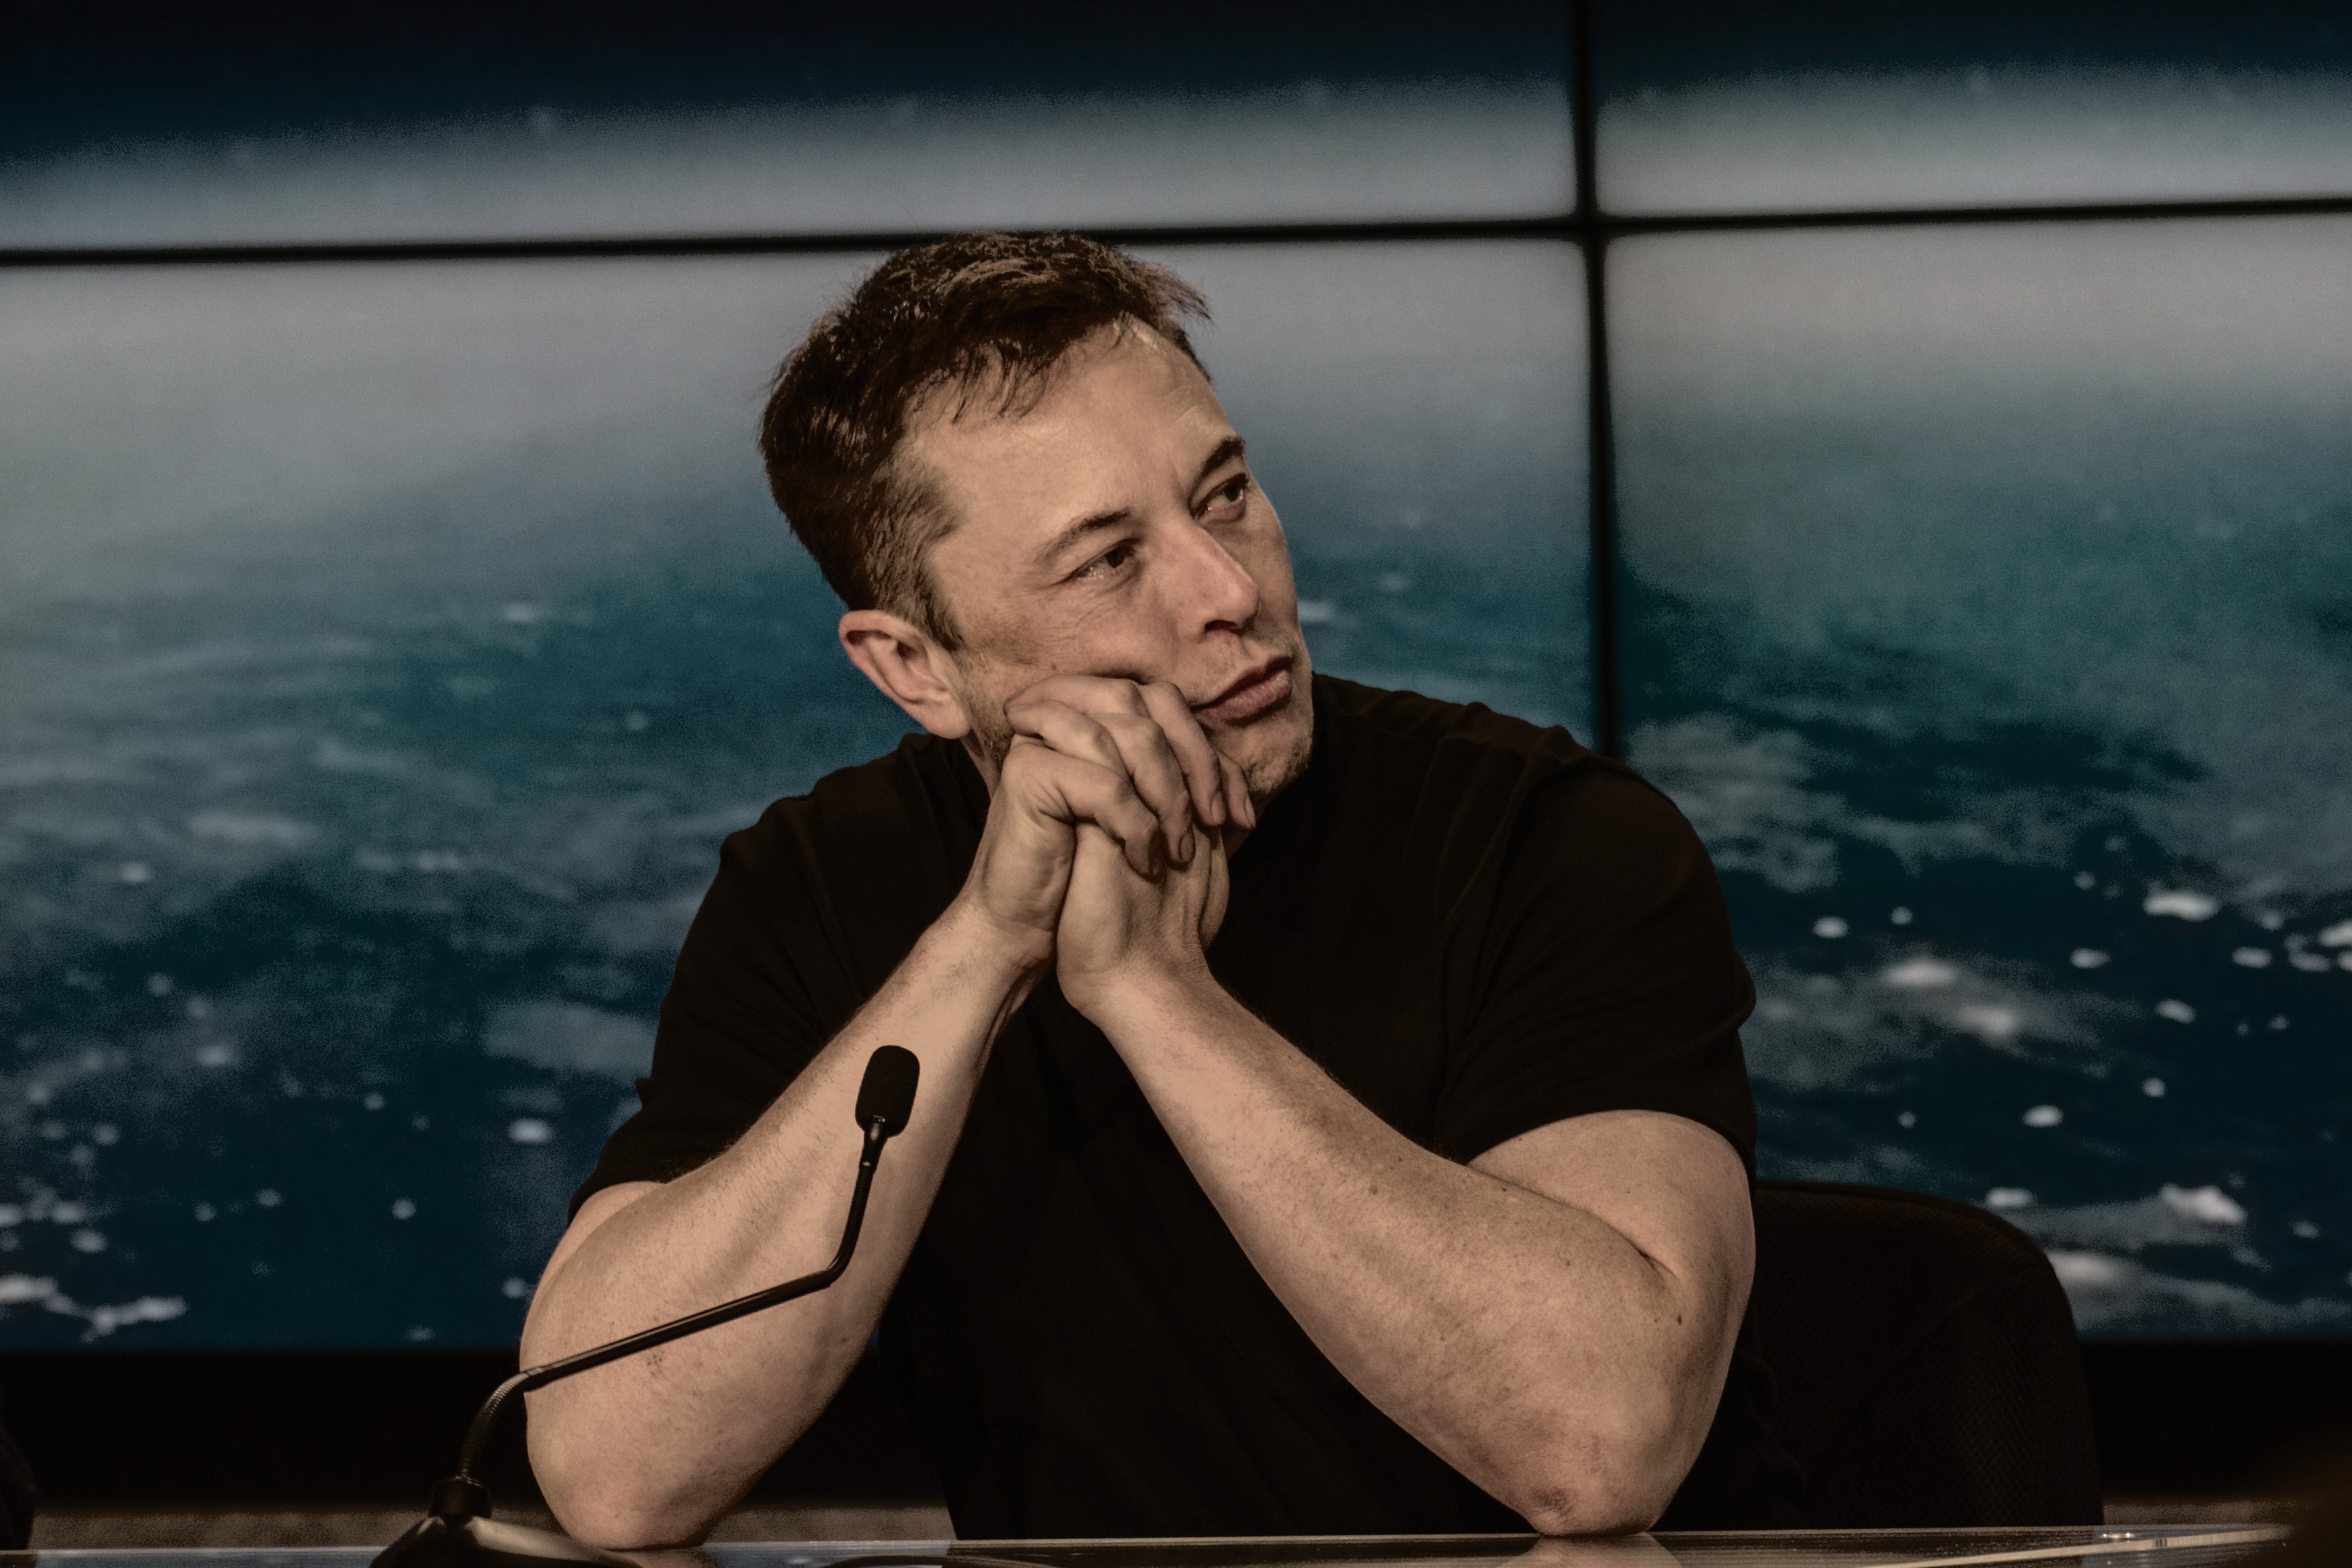 Elon Musk's Feud With Apple Criticized By Tesla Bulls, Others: 'Frontloading A Fight With Cook…Won't Work'